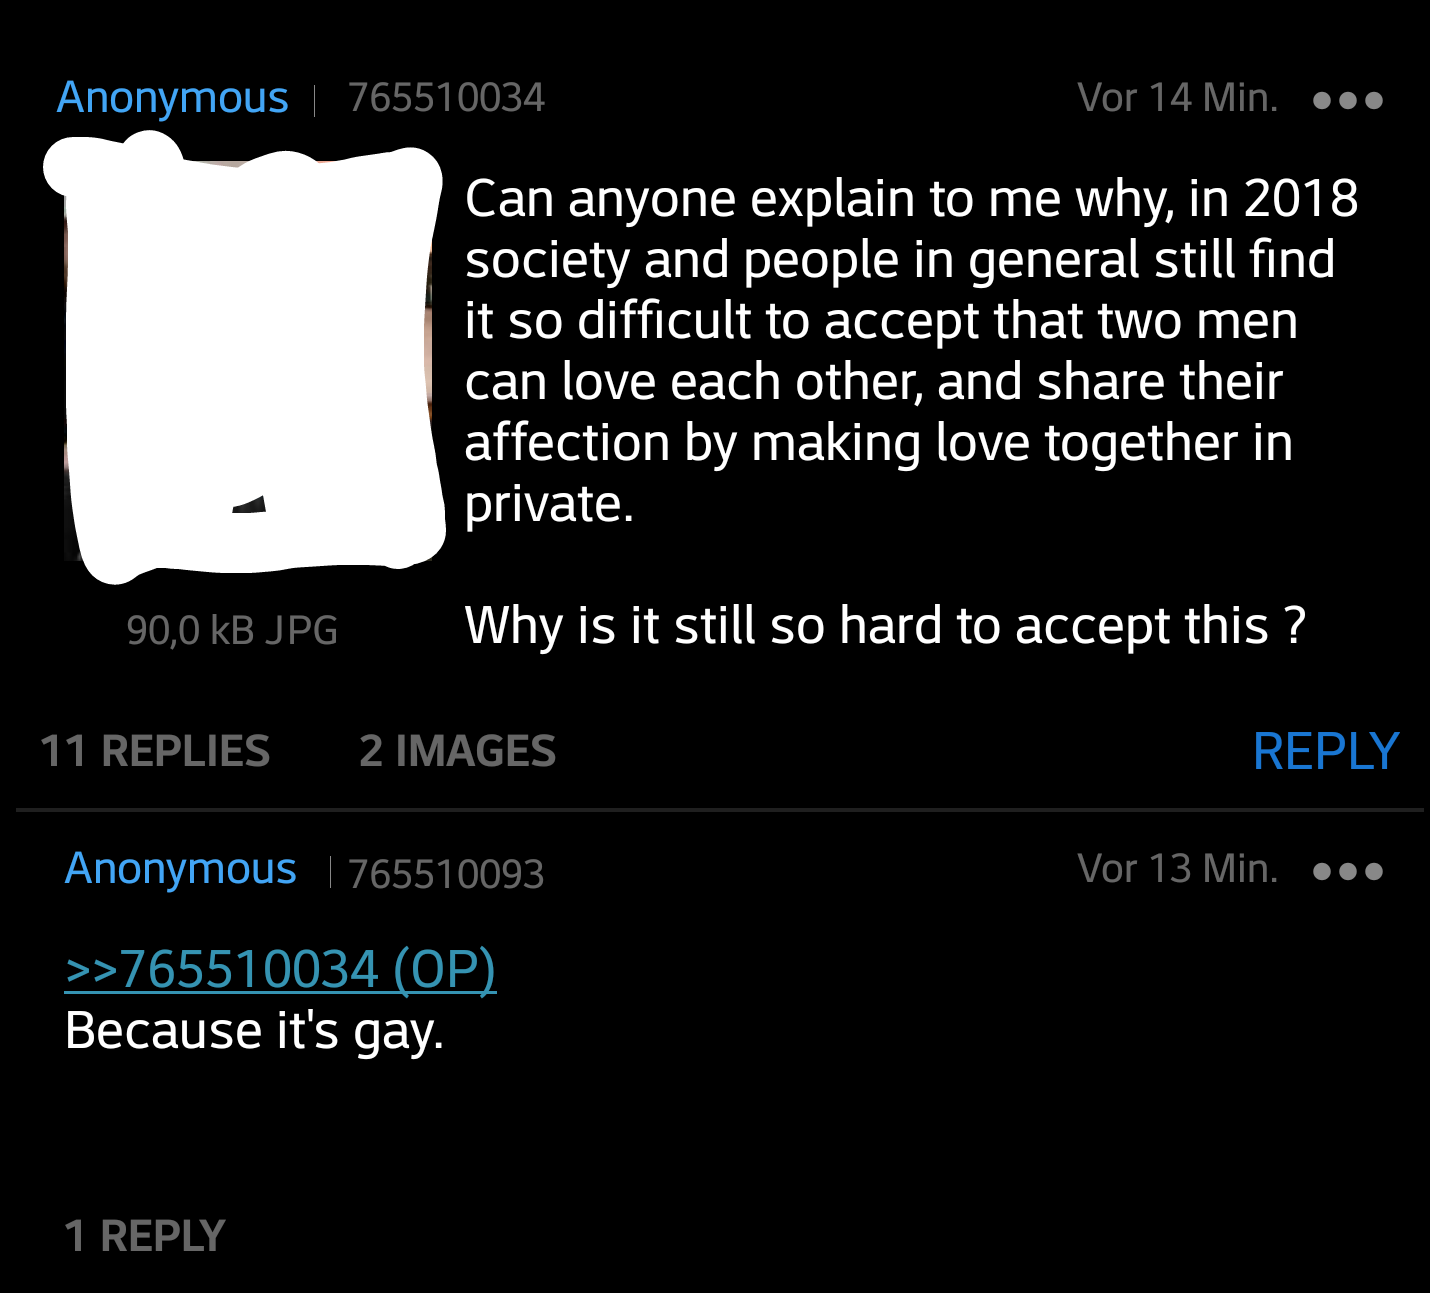 Anon supports gay rights